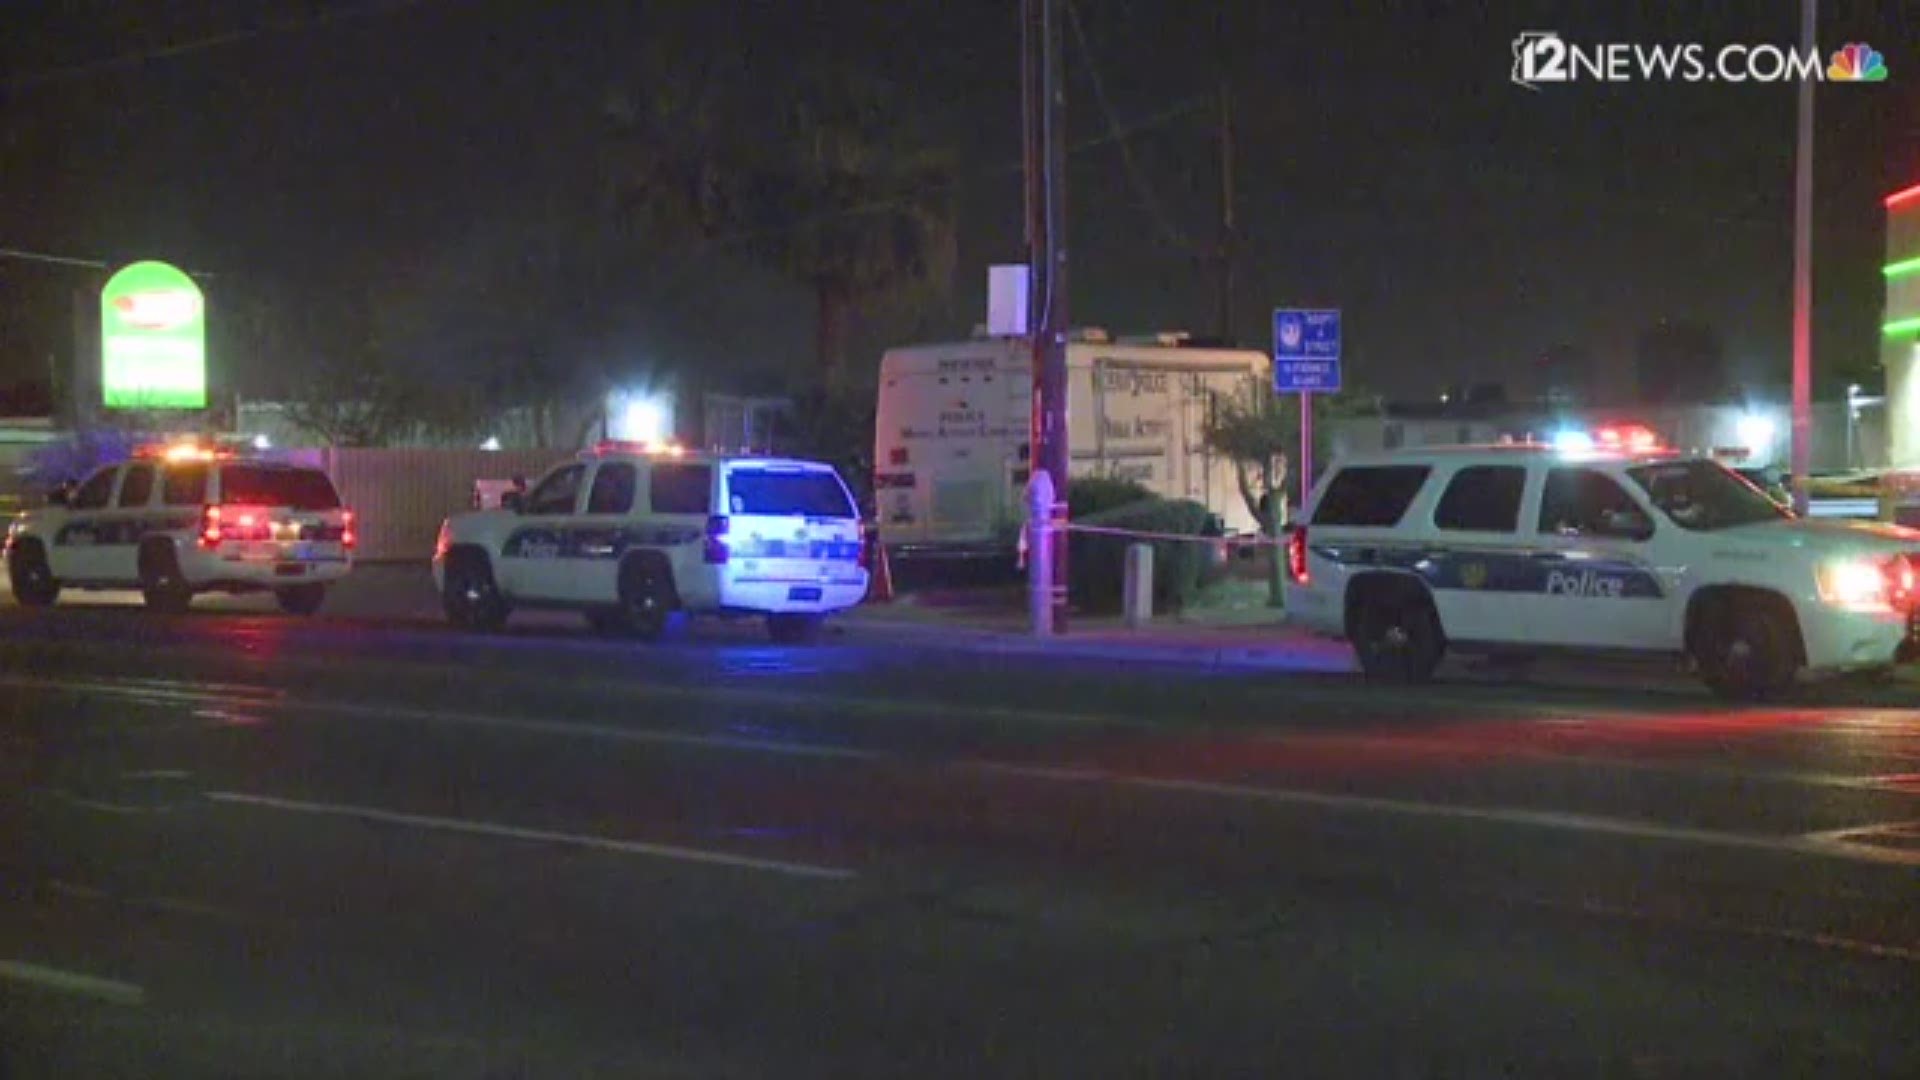 Phoenix police are investigating the shooting deaths of two men found in a parking lot near Indian School Road and 16th Street.